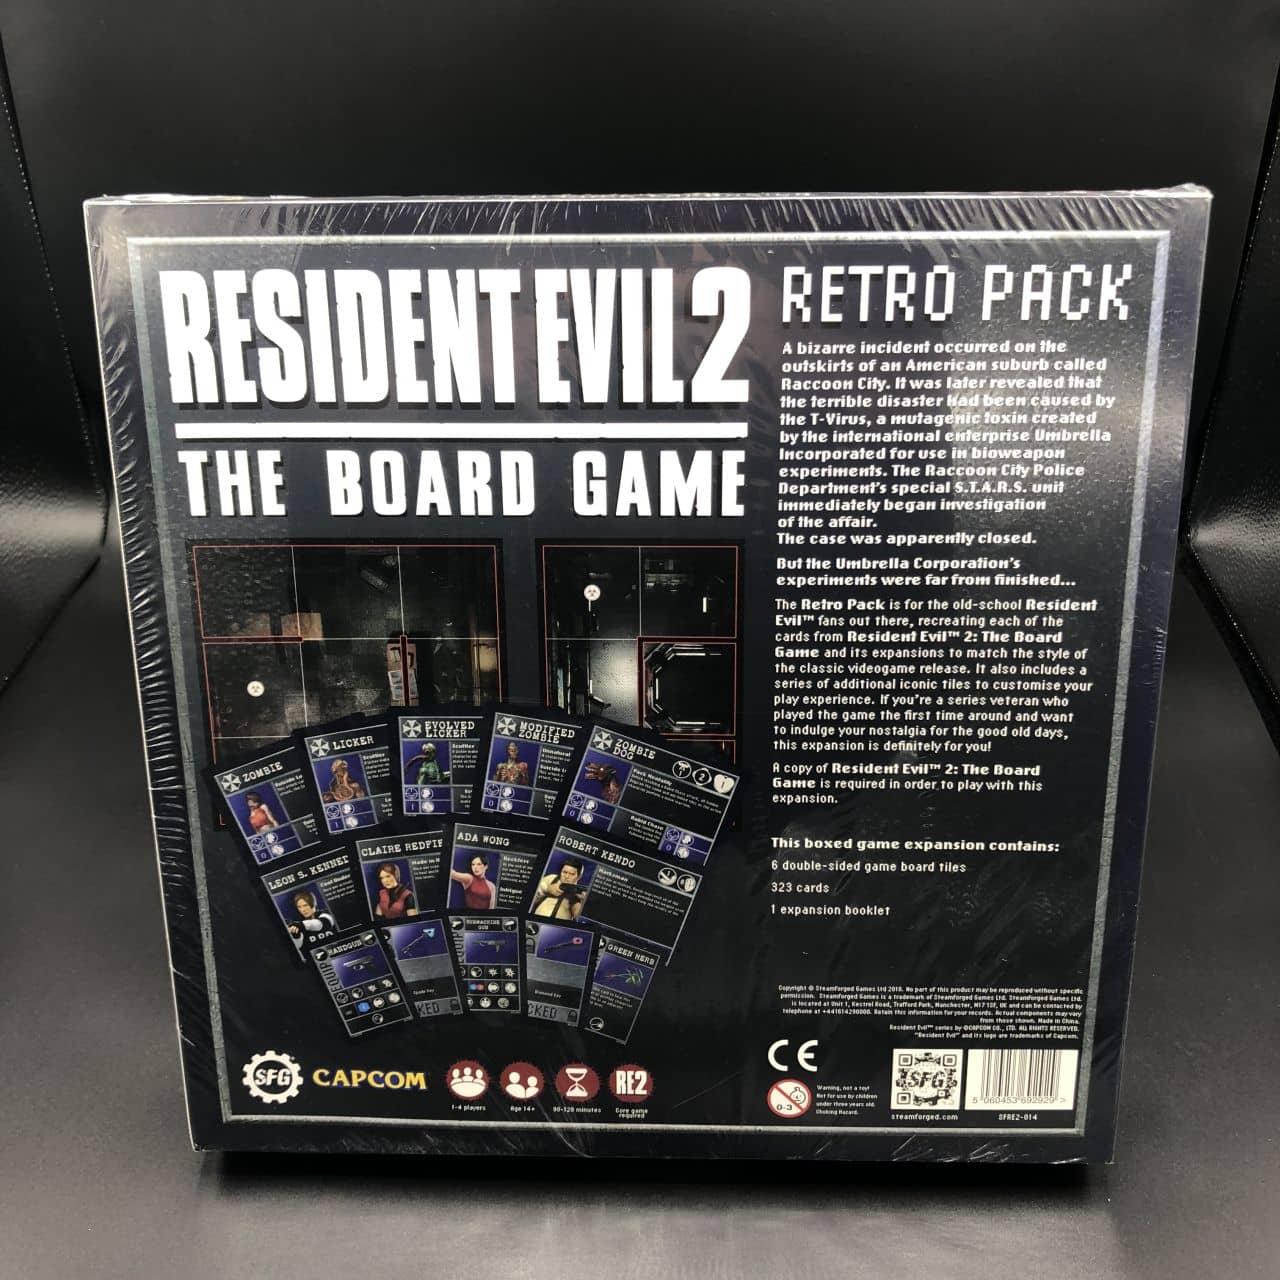 Resident Evil 2: The Board Game - Retro Pack Expansion (NEU)